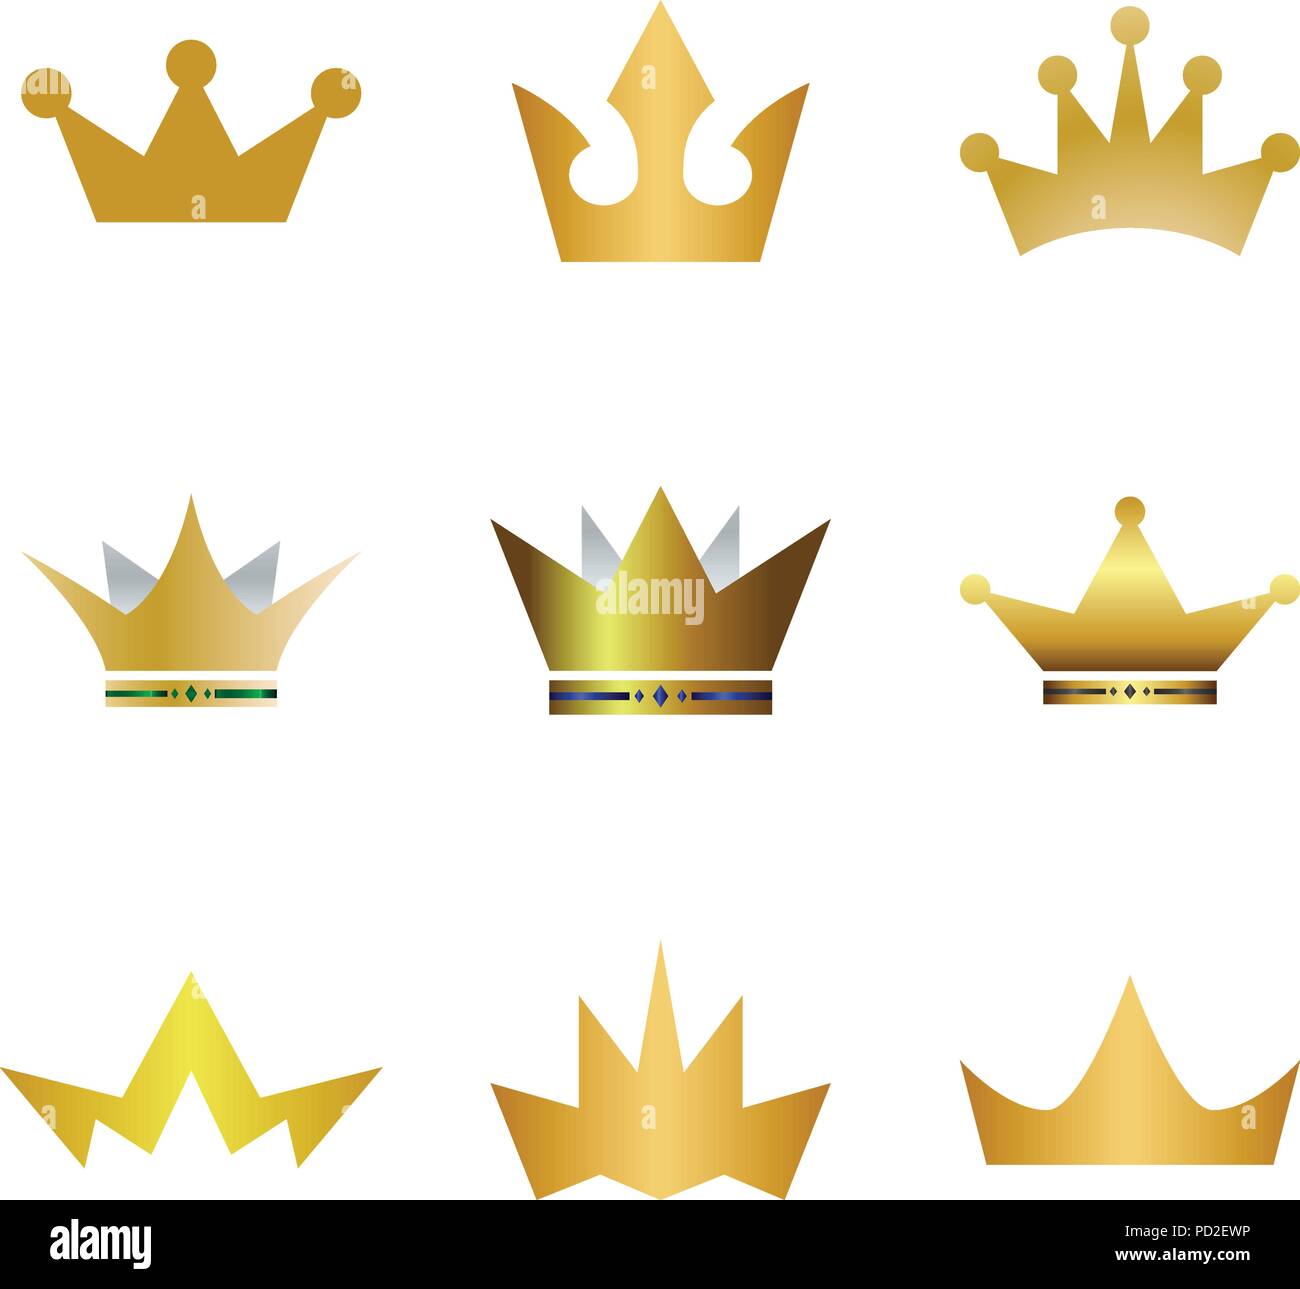 Collection of gold crown logo icon element Stock Vector